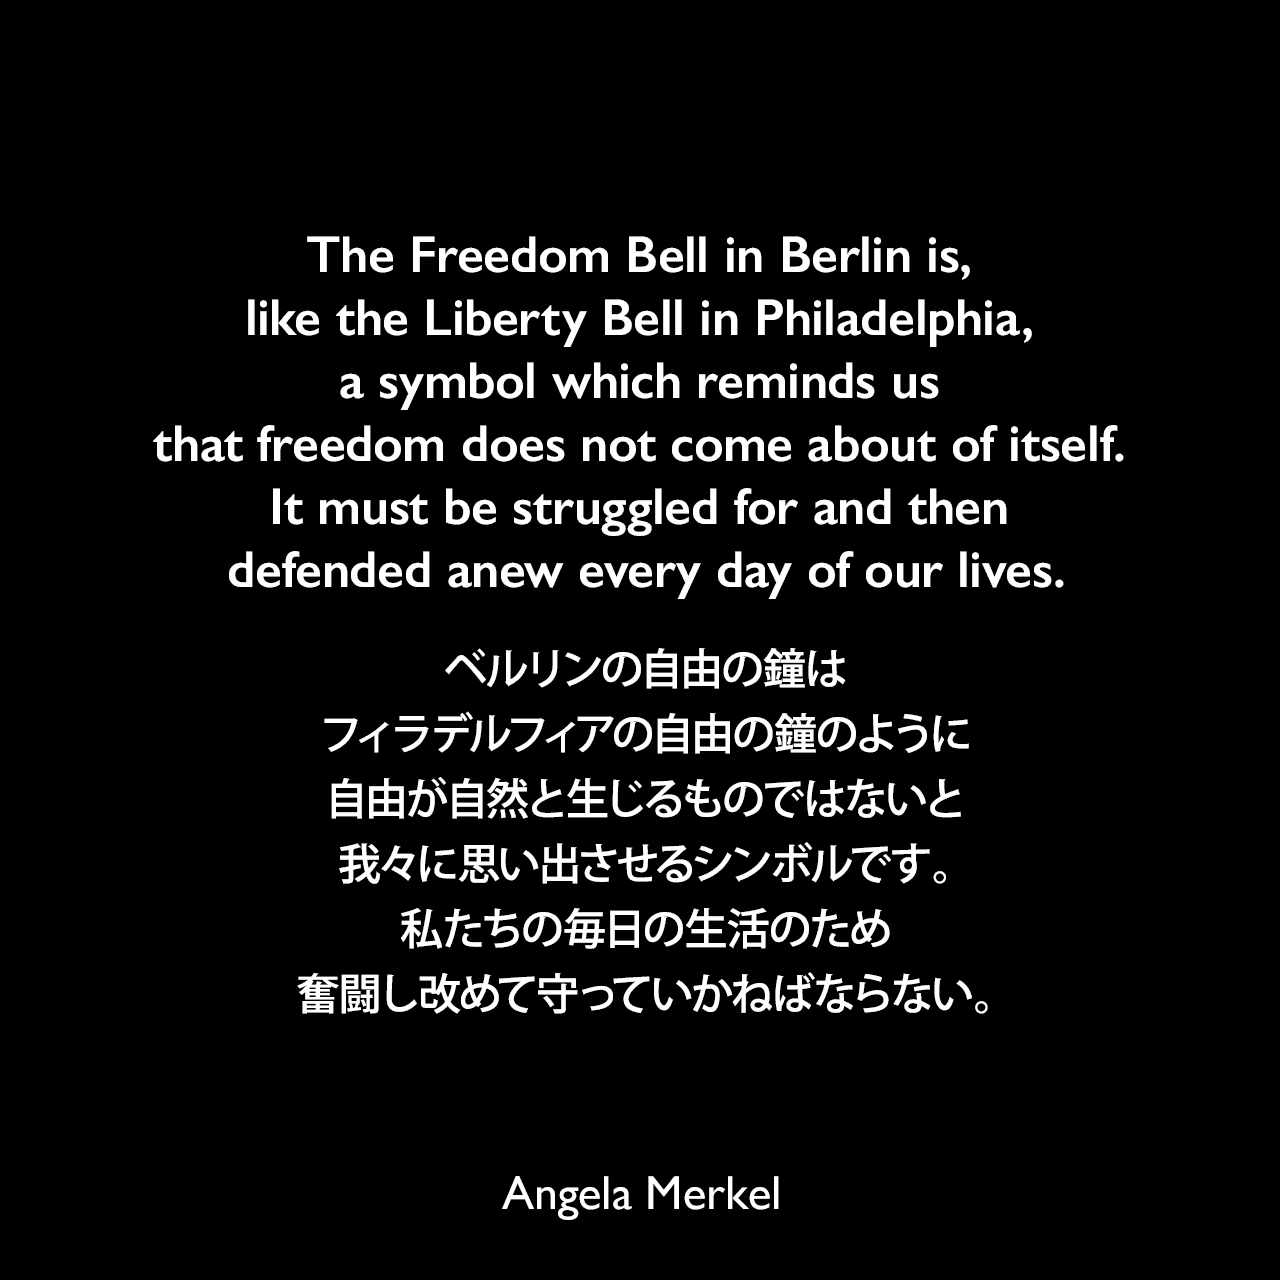 The Freedom Bell in Berlin is, like the Liberty Bell in Philadelphia, a symbol which reminds us that freedom does not come about of itself. It must be struggled for and then defended anew every day of our lives.ベルリンの自由の鐘は、フィラデルフィアの自由の鐘のように、自由が自然と生じるものではないと我々に思い出させるシンボルです。私たちの毎日の生活のため奮闘し改めて守っていかねばならない。- 2009年11月4日、国会の合同会議前の発言よりAngela Merkel